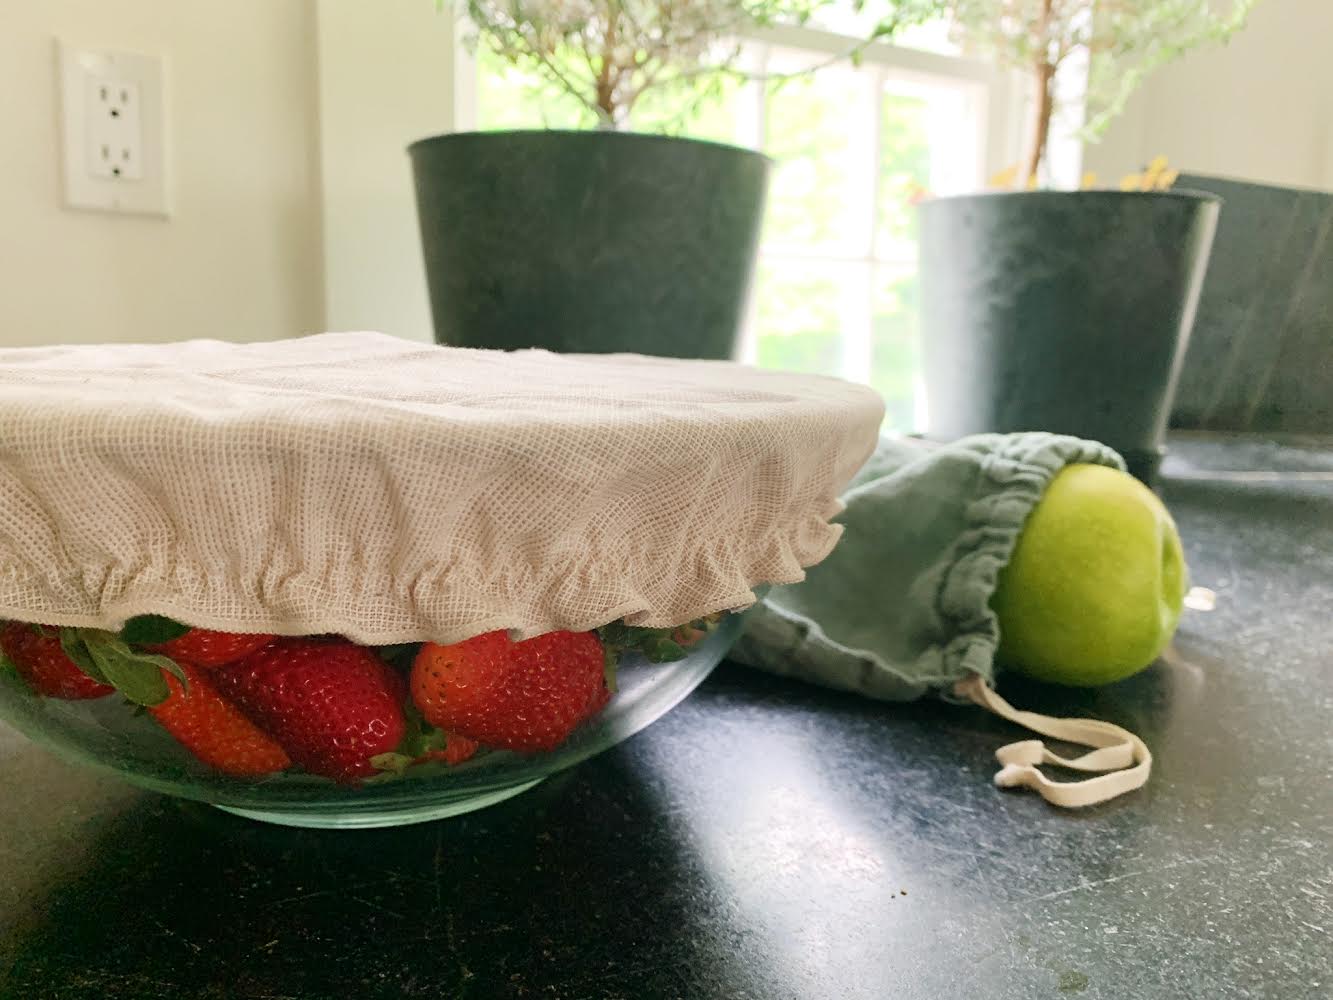 What a reuse future includes. Reusable cloth bowl cover covering up of strawberries. Another reusable bag is in the background with an apple inside.